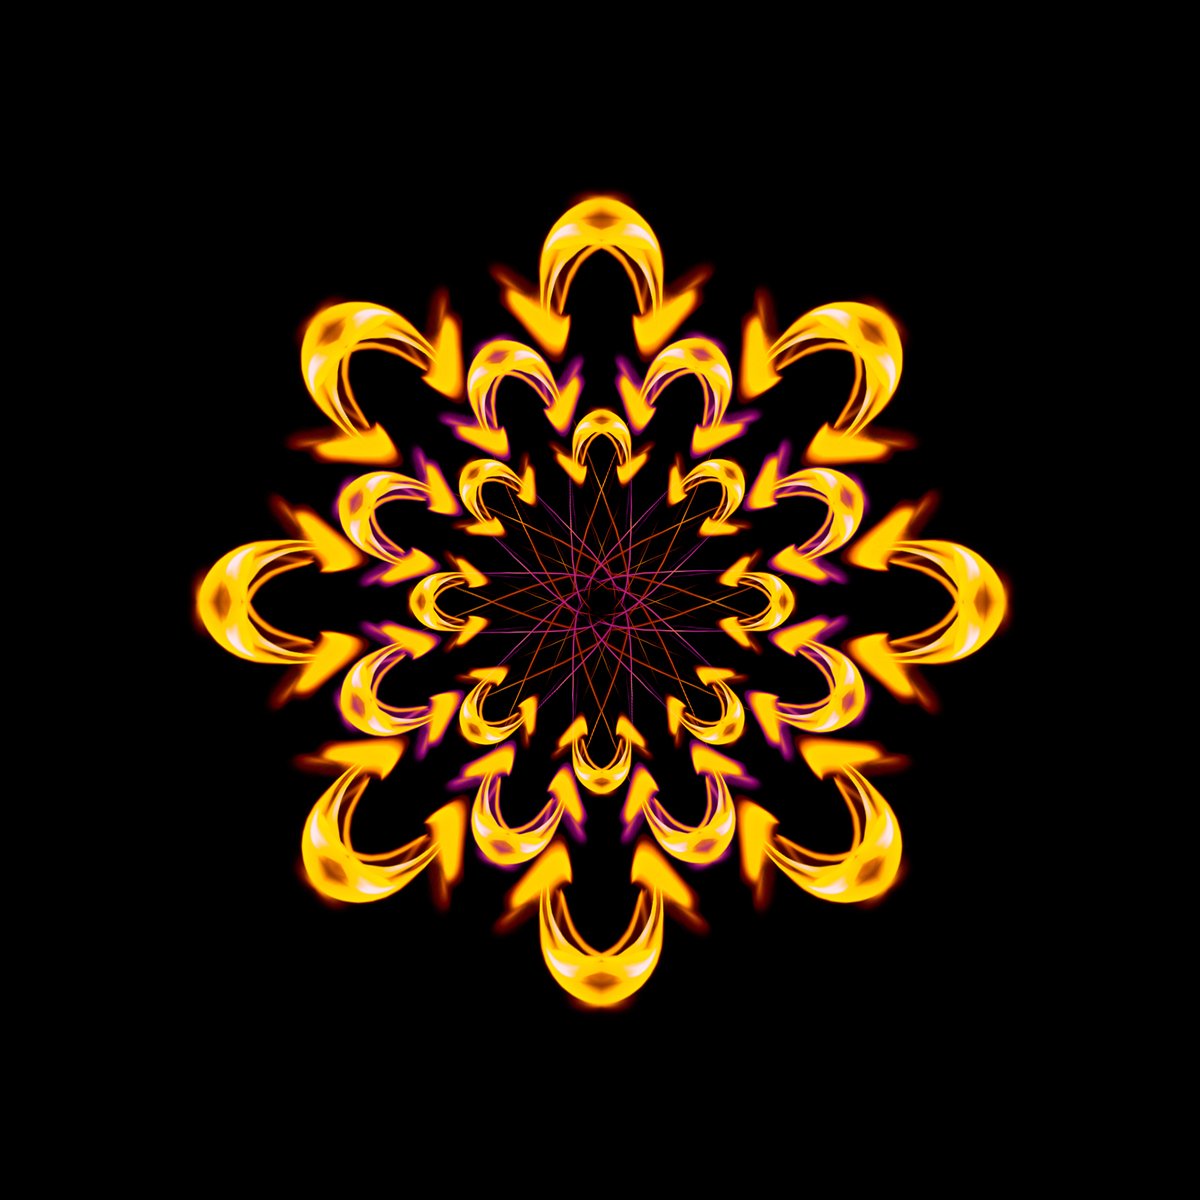 an image of flames on a black background